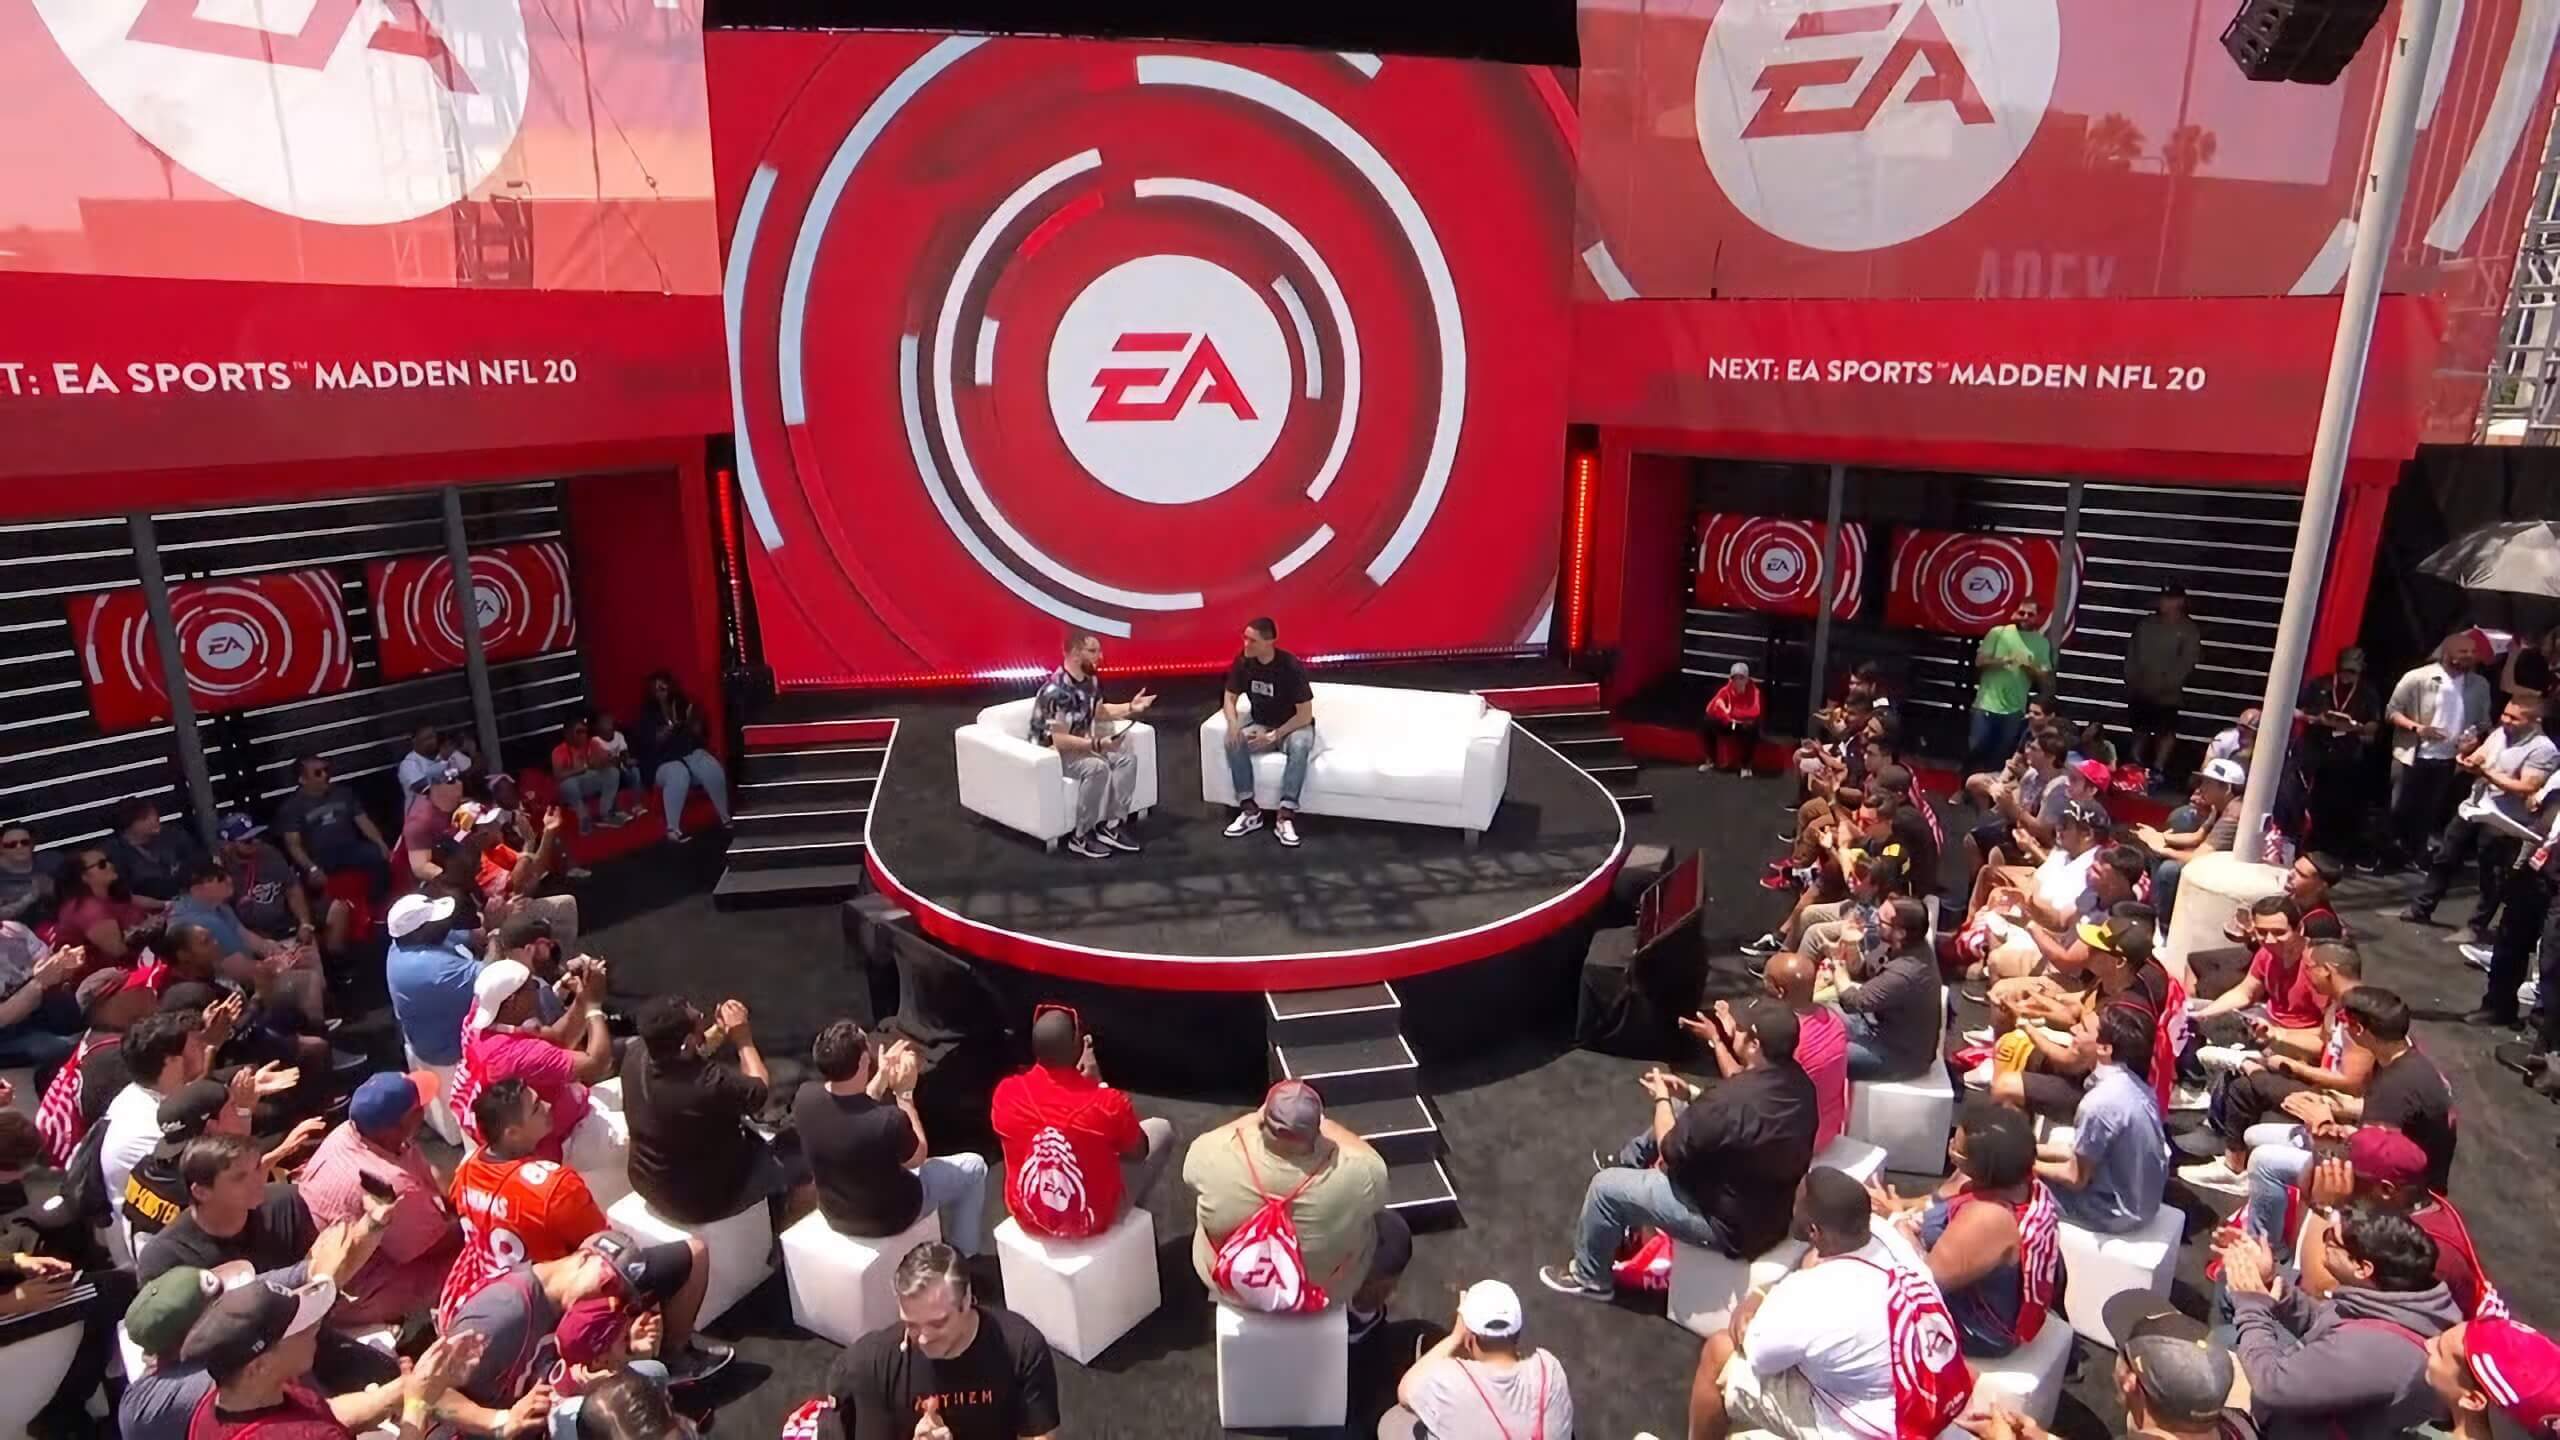 EA's Play 'Live' confirmed for June 11 as part of Summer Game Fest